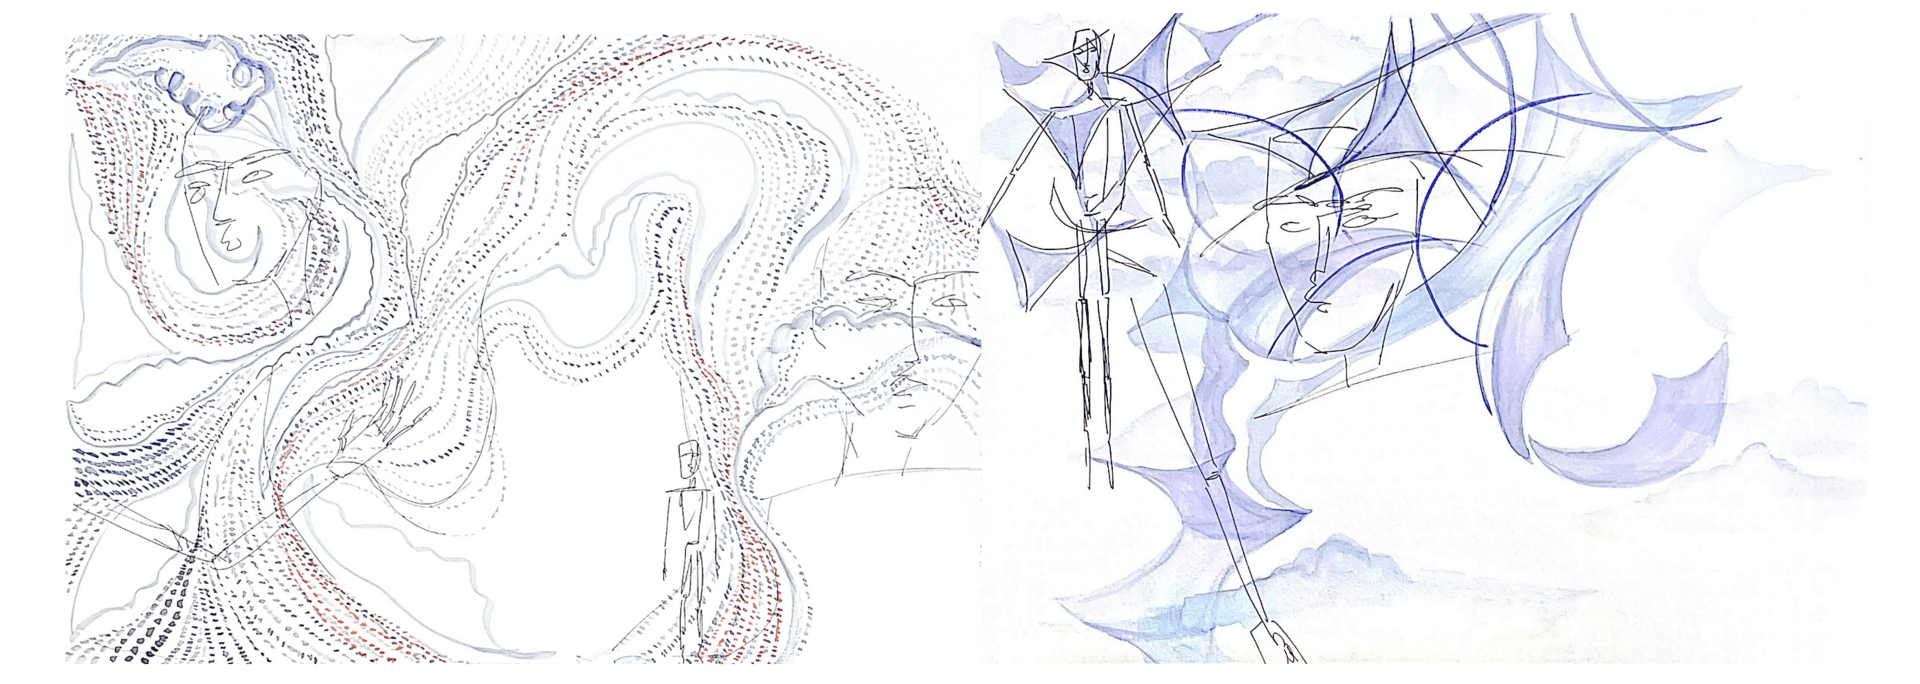 Image of two drawings, with two faces and a sketchy human figure surrounded by swirling dotted lines on the left, and a larger face and figure surrounded by blue-washed curved shapes on the right.